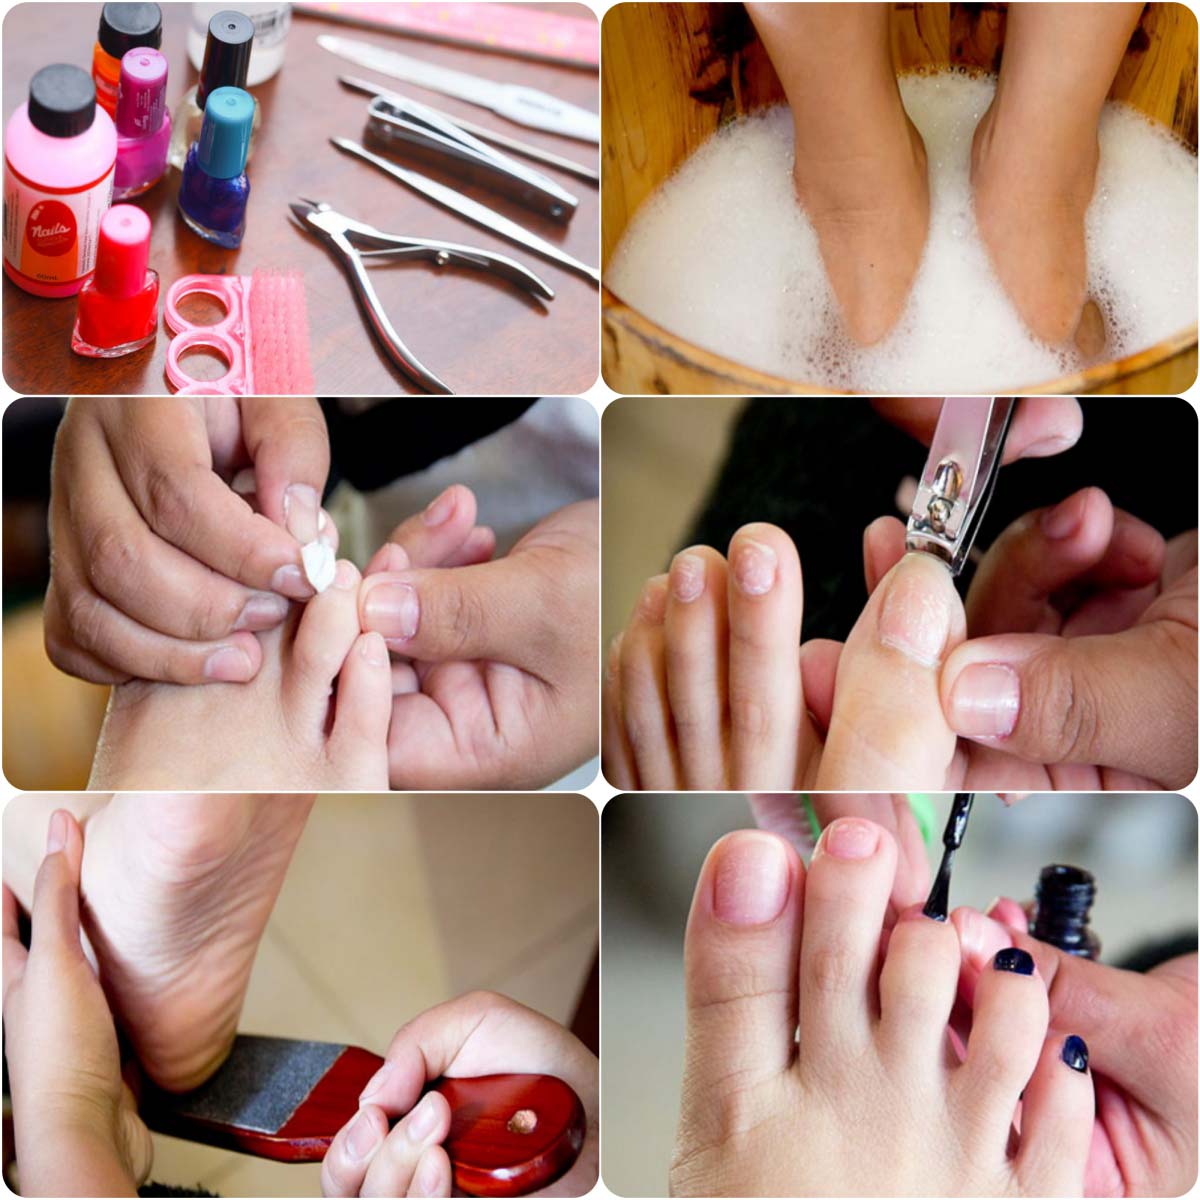 How To Do Best Pedicure At Home By Yourself- Steps | Stylo Planet